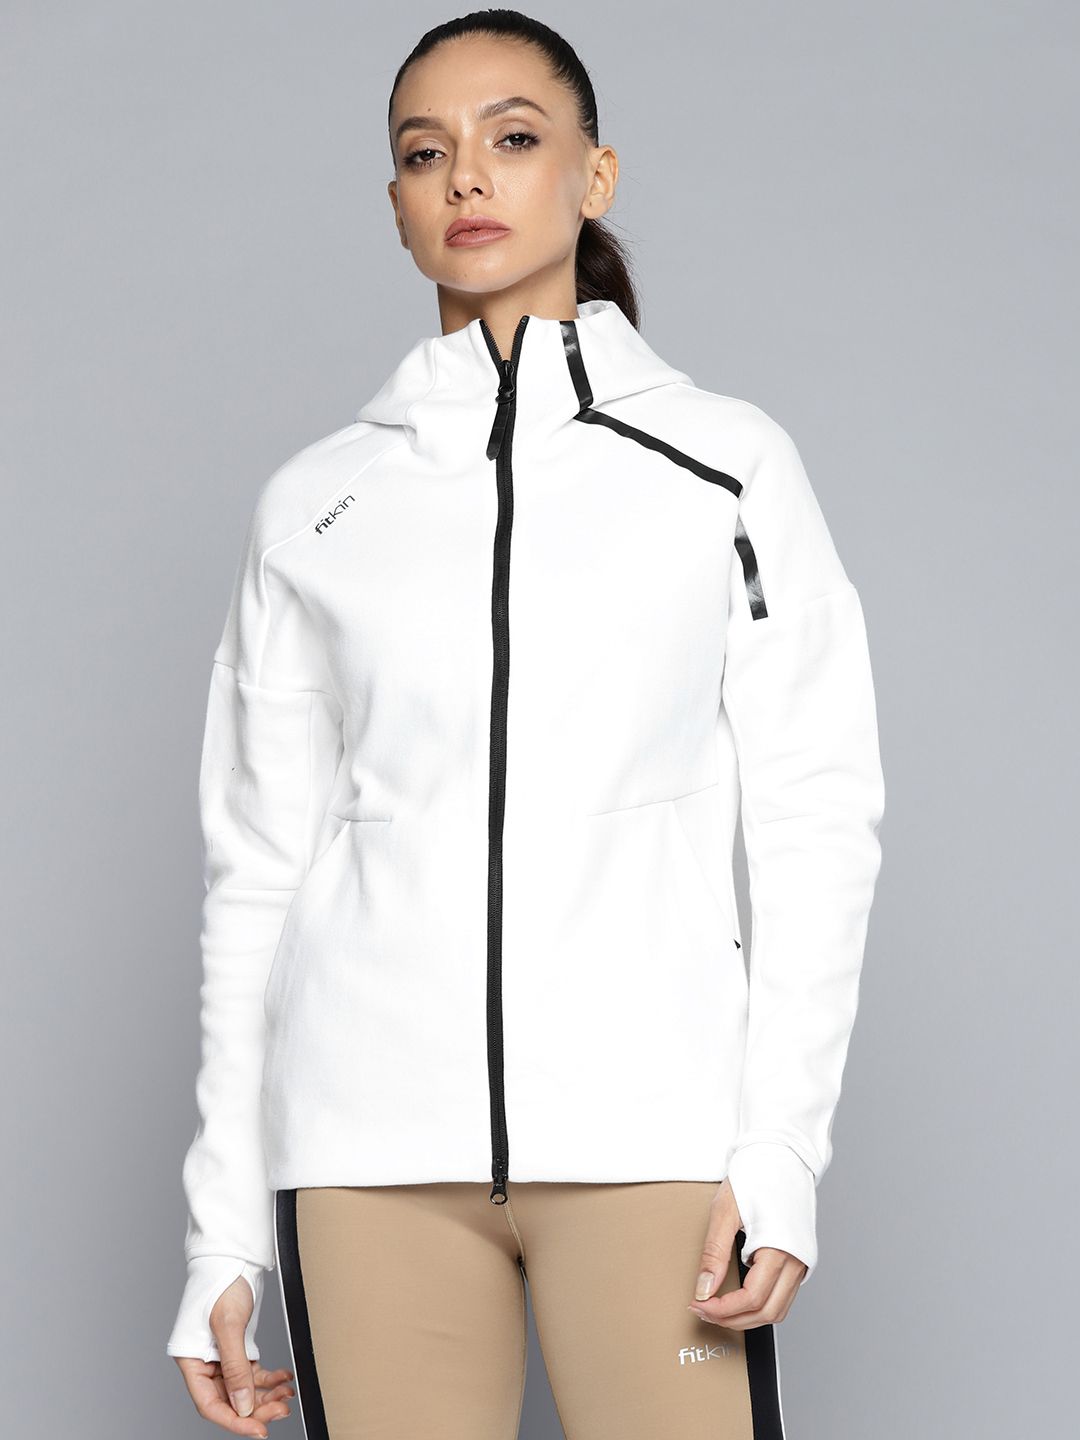 Fitkin Women White Solid Training or Gym Hooded Jacket Price in India